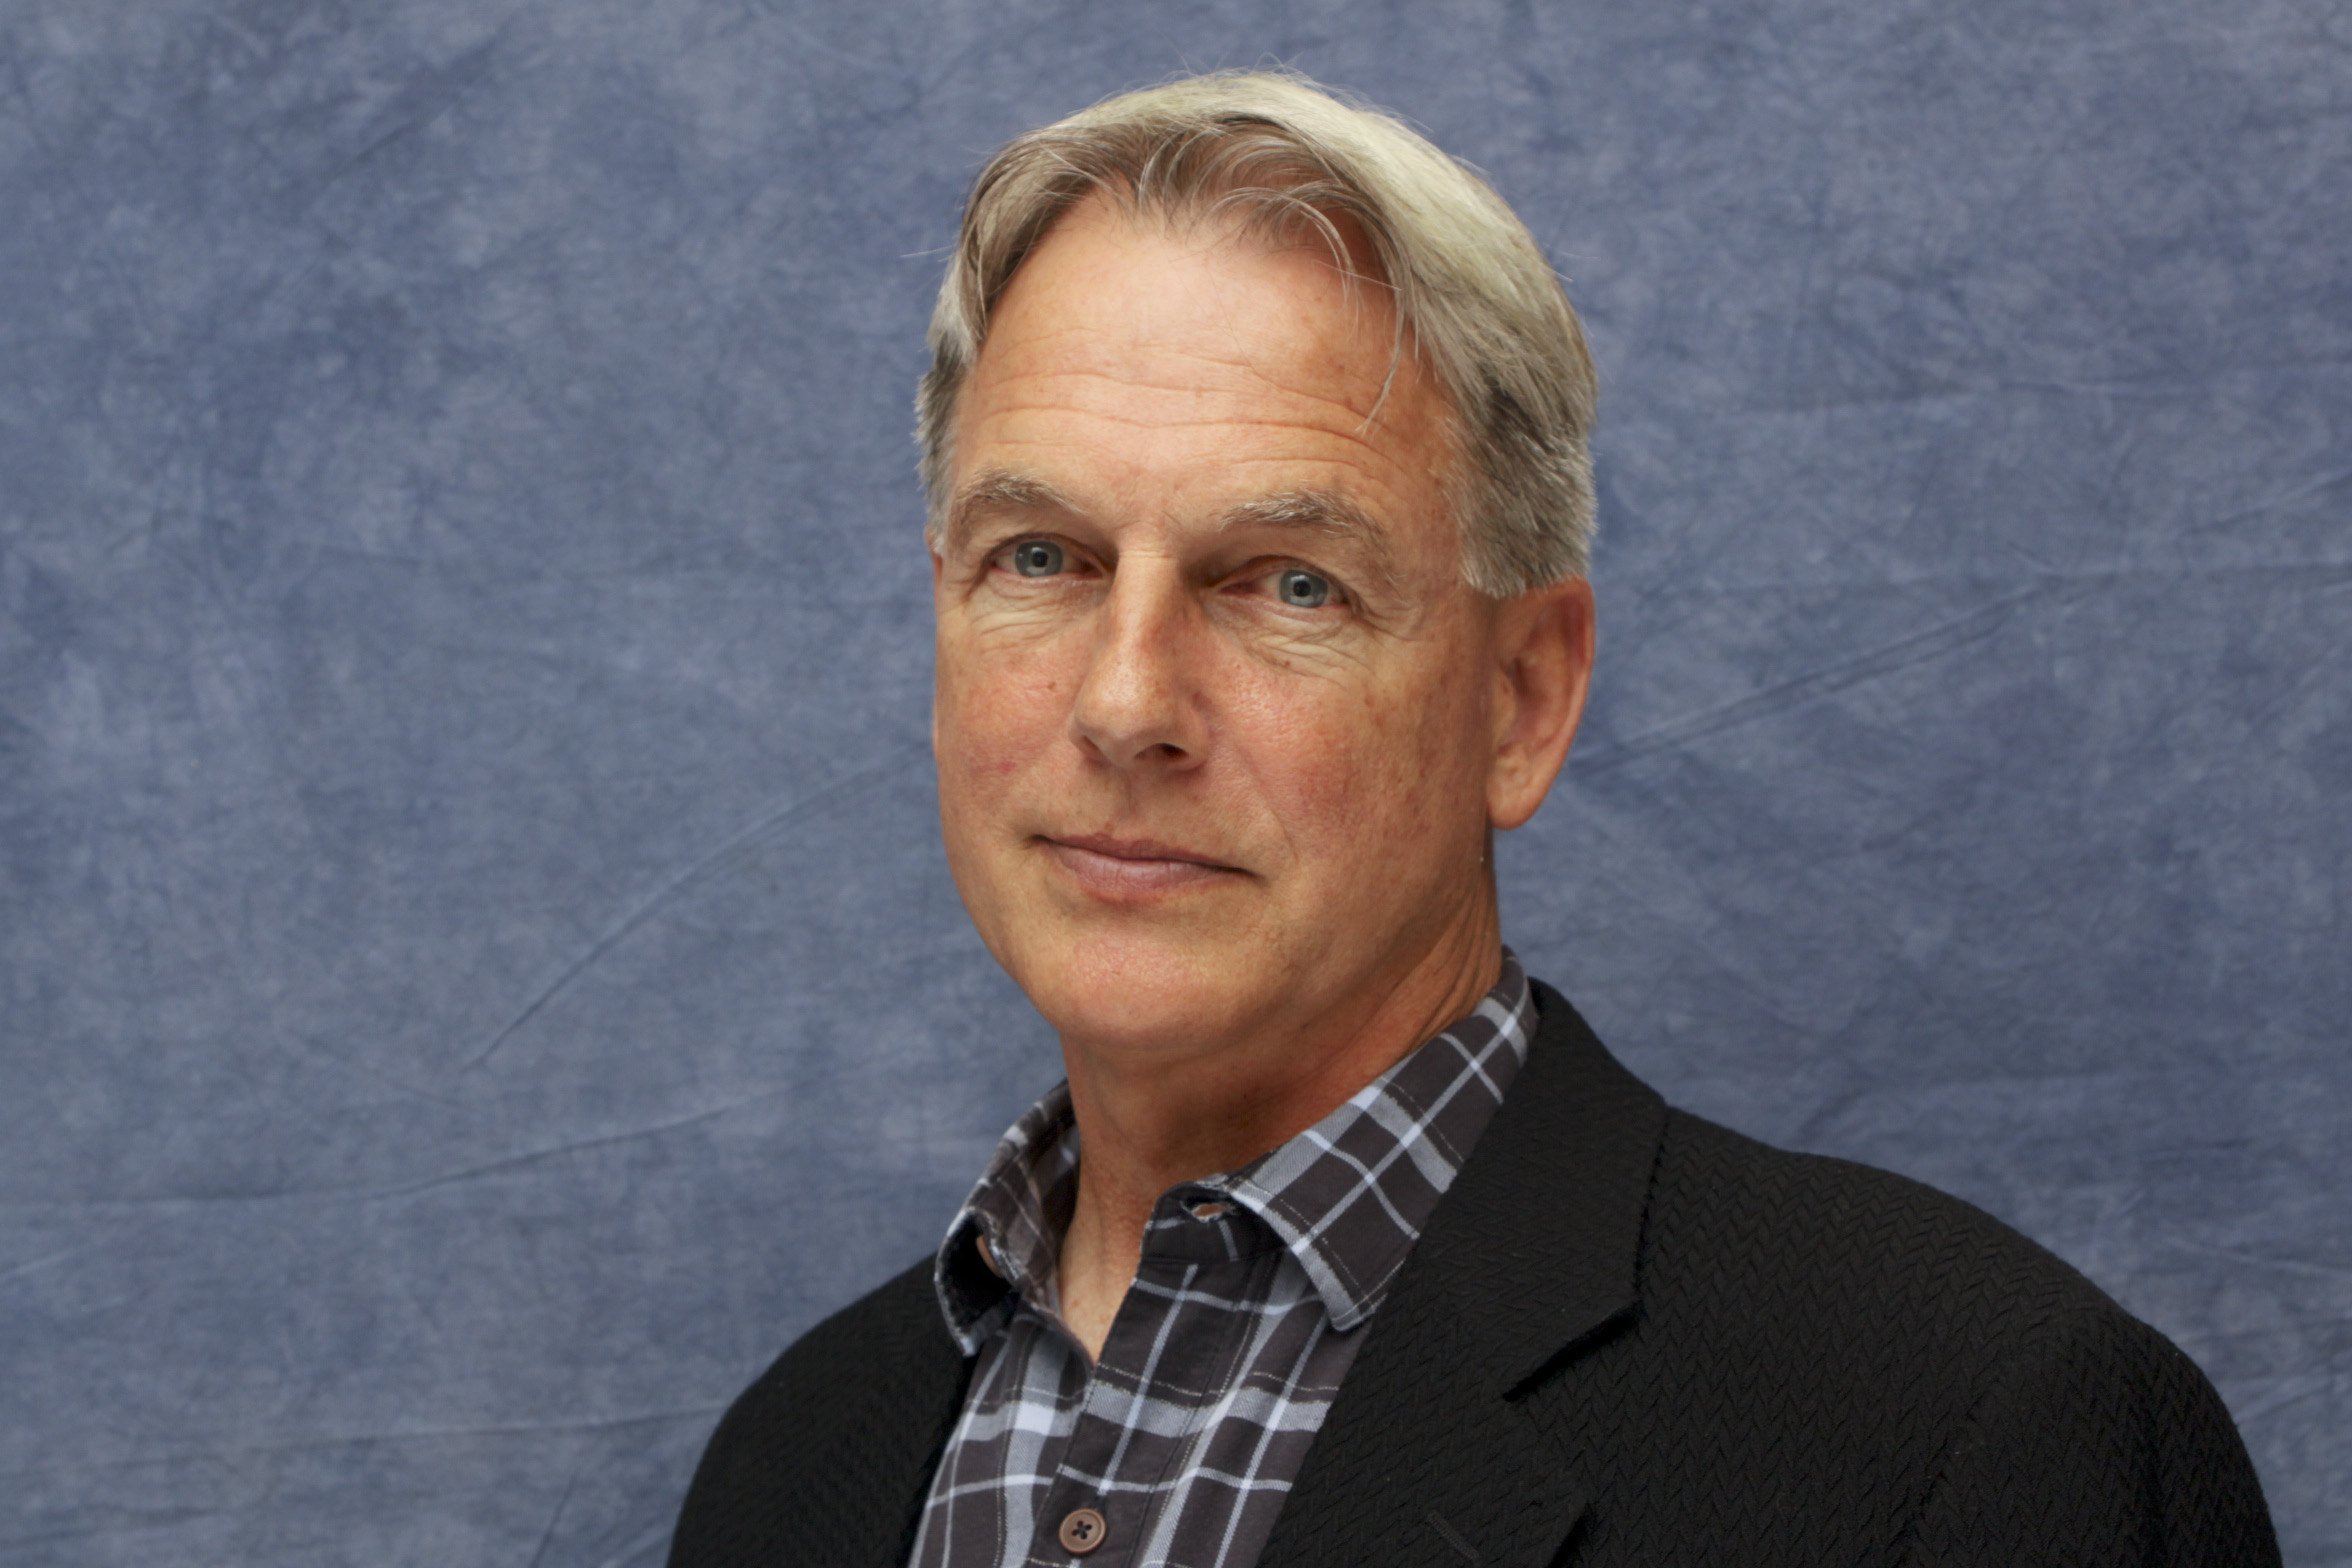 Mark Harmon visits the Four Seasons Hotel in Beverly Hills, California on April 22, 2009 | Photo: Getty Images